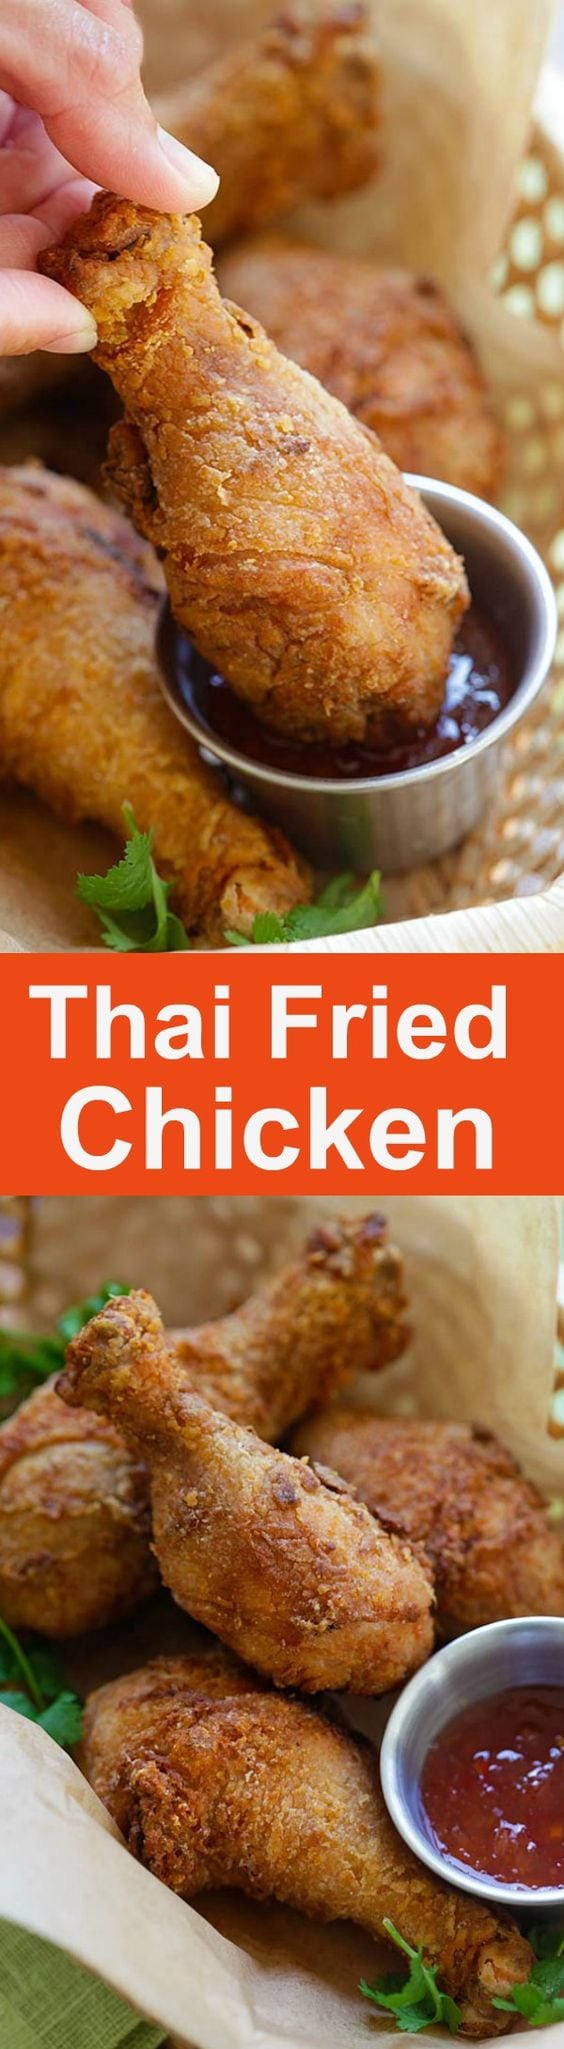 Thai Fried Chicken - the BEST fried chicken recipe ever, marinated with cilantro, garlic and Asian seasonings. Crispy, moist and so good | rasamalaysia.com